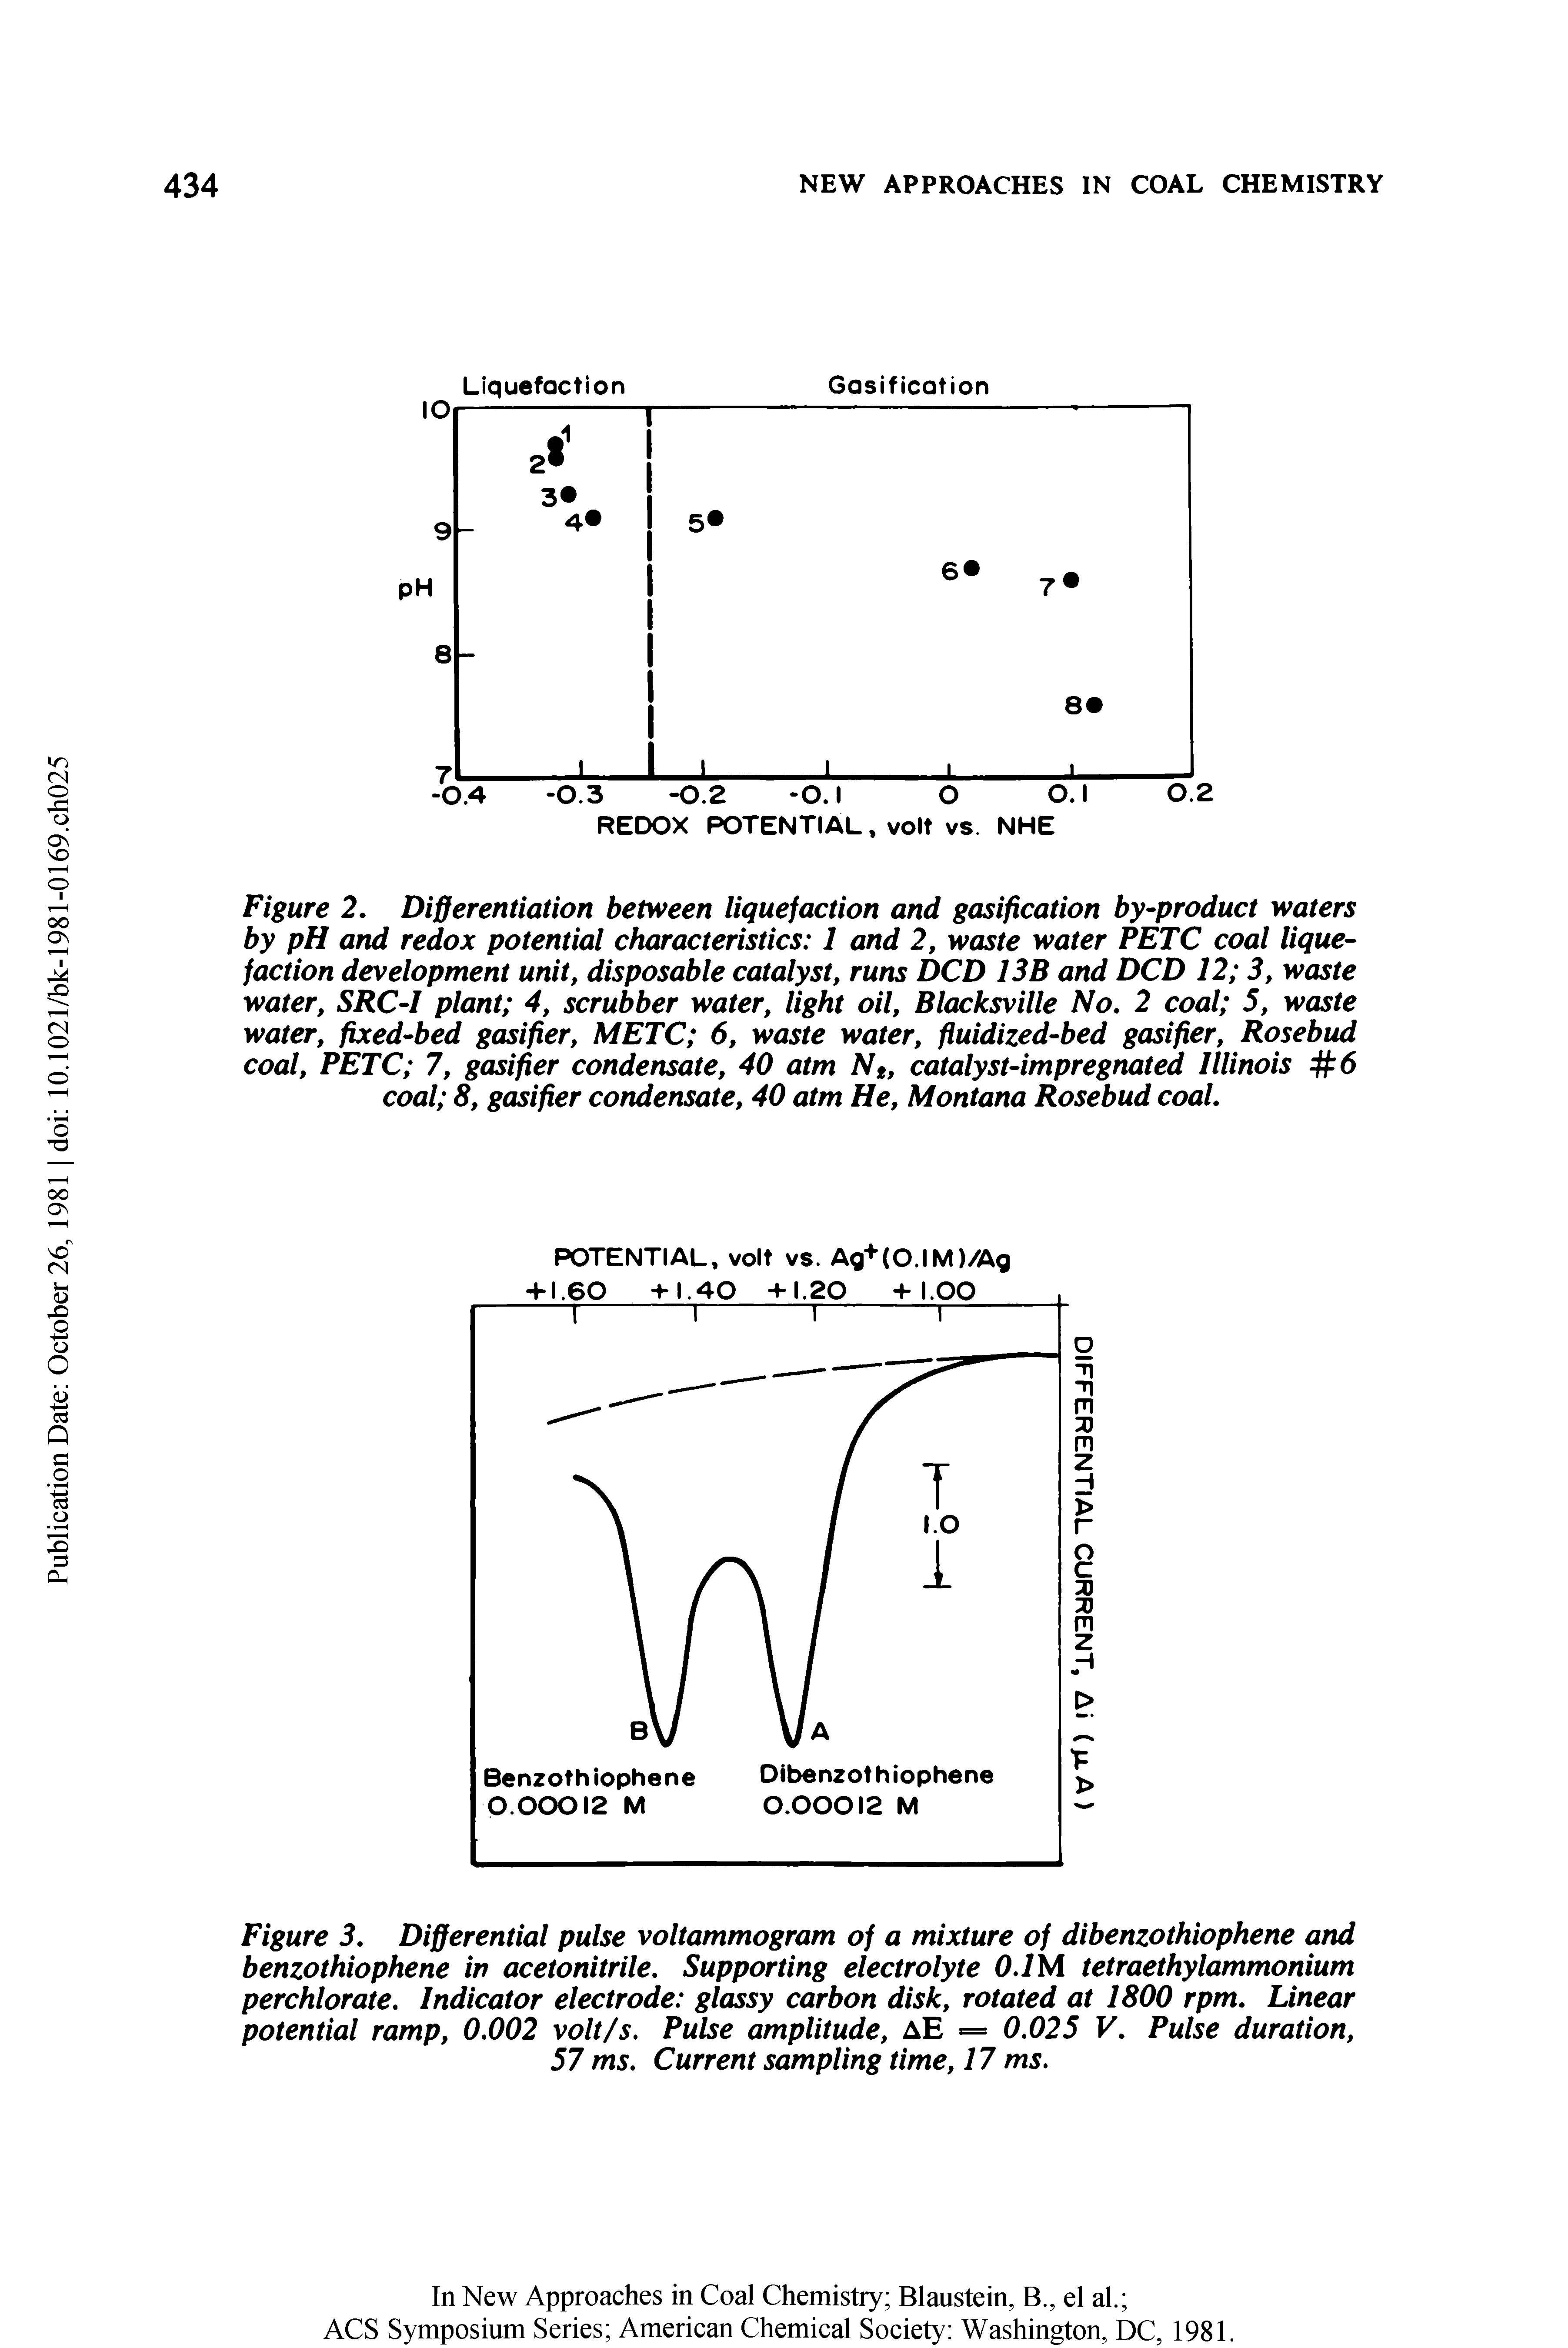 Figure 3. Differential pulse voltammogram of a mixture of dibenzothiophene and benzothiophene in acetonitrile. Supporting electrolyte 0.1 M tetraethylammonium perchlorate. Indicator electrode glassy carbon disk, rotated at 1800 rpm. Linear potential ramp, 0.002 volt/s. Pulse amplitude, AE = 0.025 V. Pulse duration, 57 ms. Current sampling time, 17 ms.